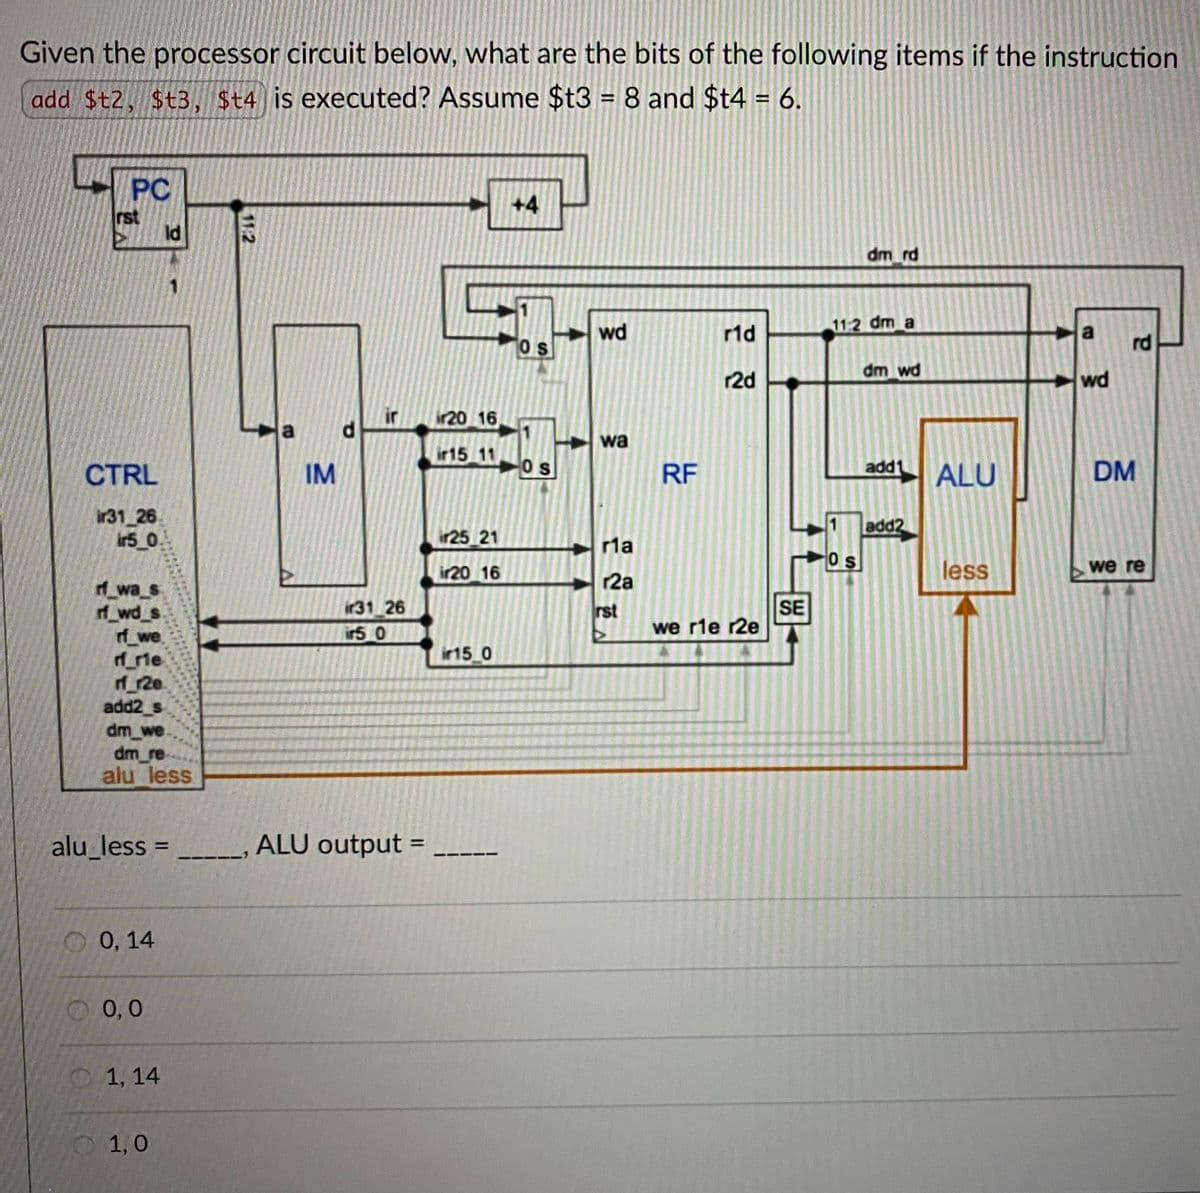 Given the processor circuit below, what are the bits of the following items if the instruction
add $t2, $t3, $t4 is executed? Assume $t3 = 8 and $t4 = 6.
rst
PC
ld
11:2
CTRL
ir31 26
ir5_0
rf_wa_s
rf_wd_s
rf we
rf_rie
rf 12e
add2 s
dm_we
dm_re
alu less
IM
+4
dm rd
wd
r1d
Os
PR
11:2 dm a
rd
dm wd
r2d
wd
ir
ir20 16
wa
ir15 11
O S
RF
add1
ALU
DM
add2
ir25 21
r1a
OS
ir20 16
less
we re
r2a
ir31 26
rst
SE
we rie r2e
ir5 0
ir15.0
alu_less = __
ALU output =
0,14
0,0
1,14
1,0
OOO